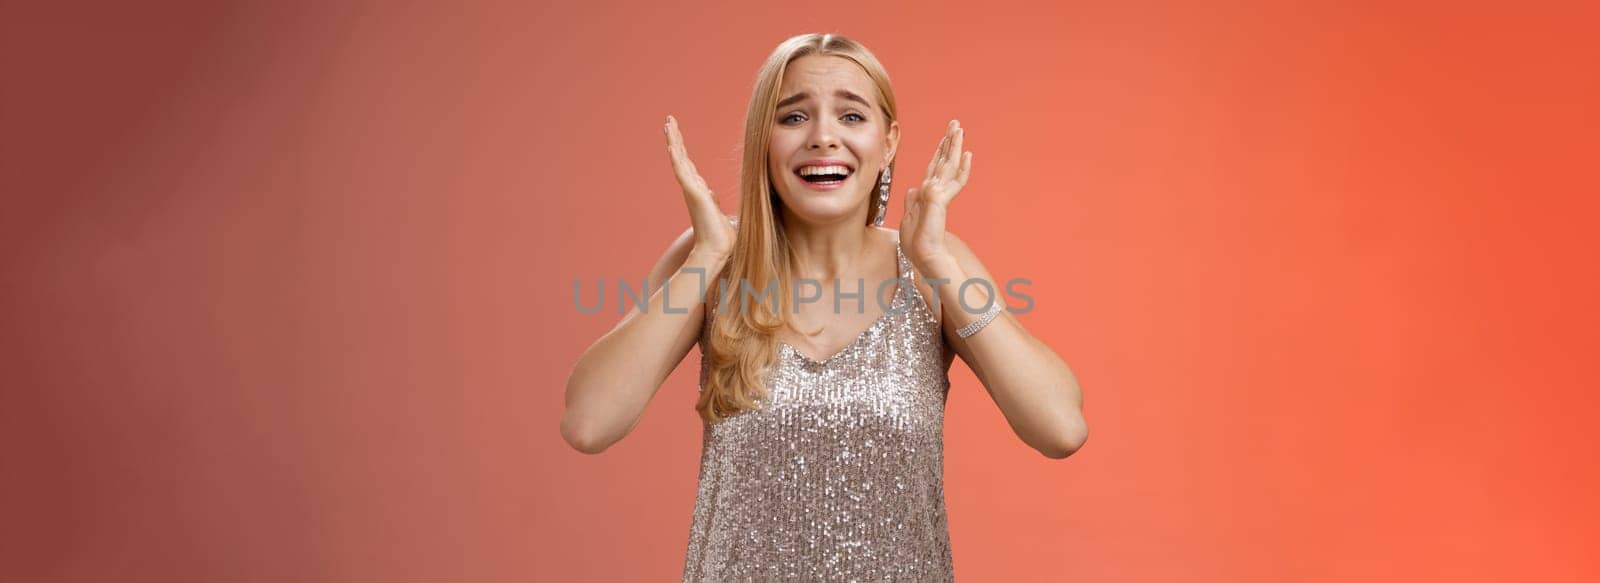 Lifestyle. Amazed freaked out excited blond female fan see favorite celebrity star screaming astonished happy look emotive wanna cry happiness waving palms near head thrilled red background.